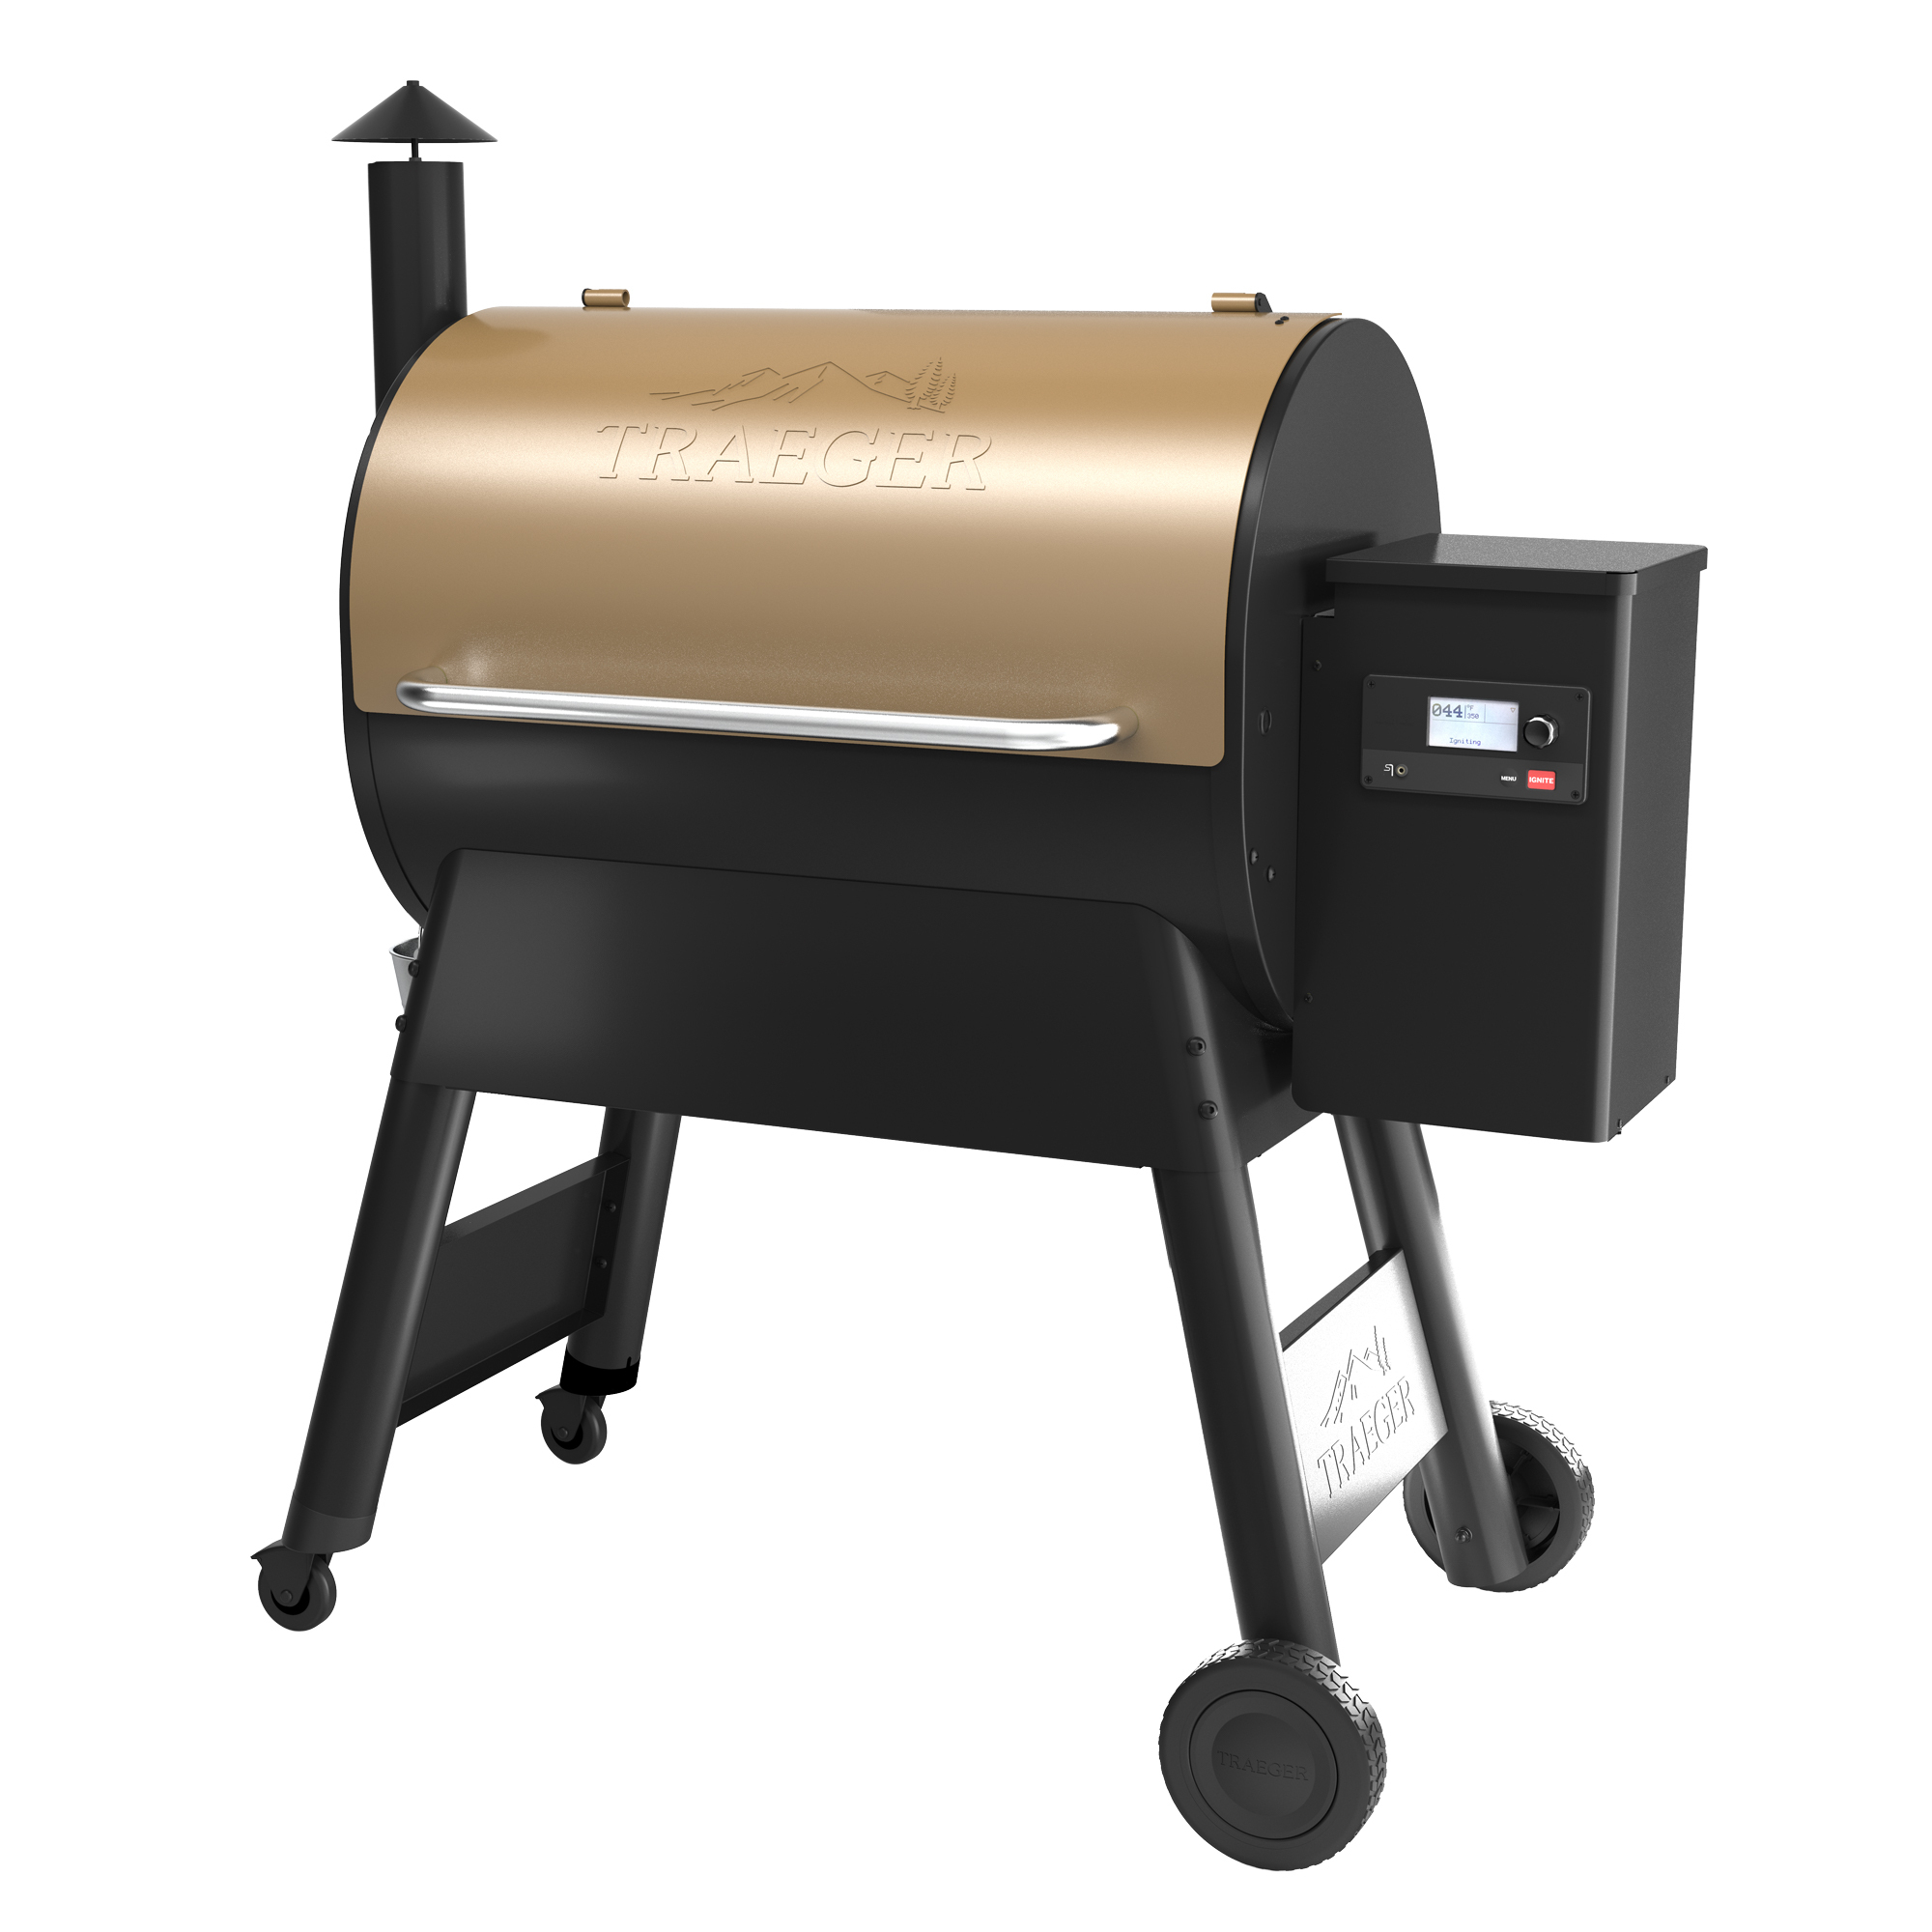 Traeger Pellet Grills Pro 780 Wood Pellet Grill and Smoker - Bronze - image 4 of 12